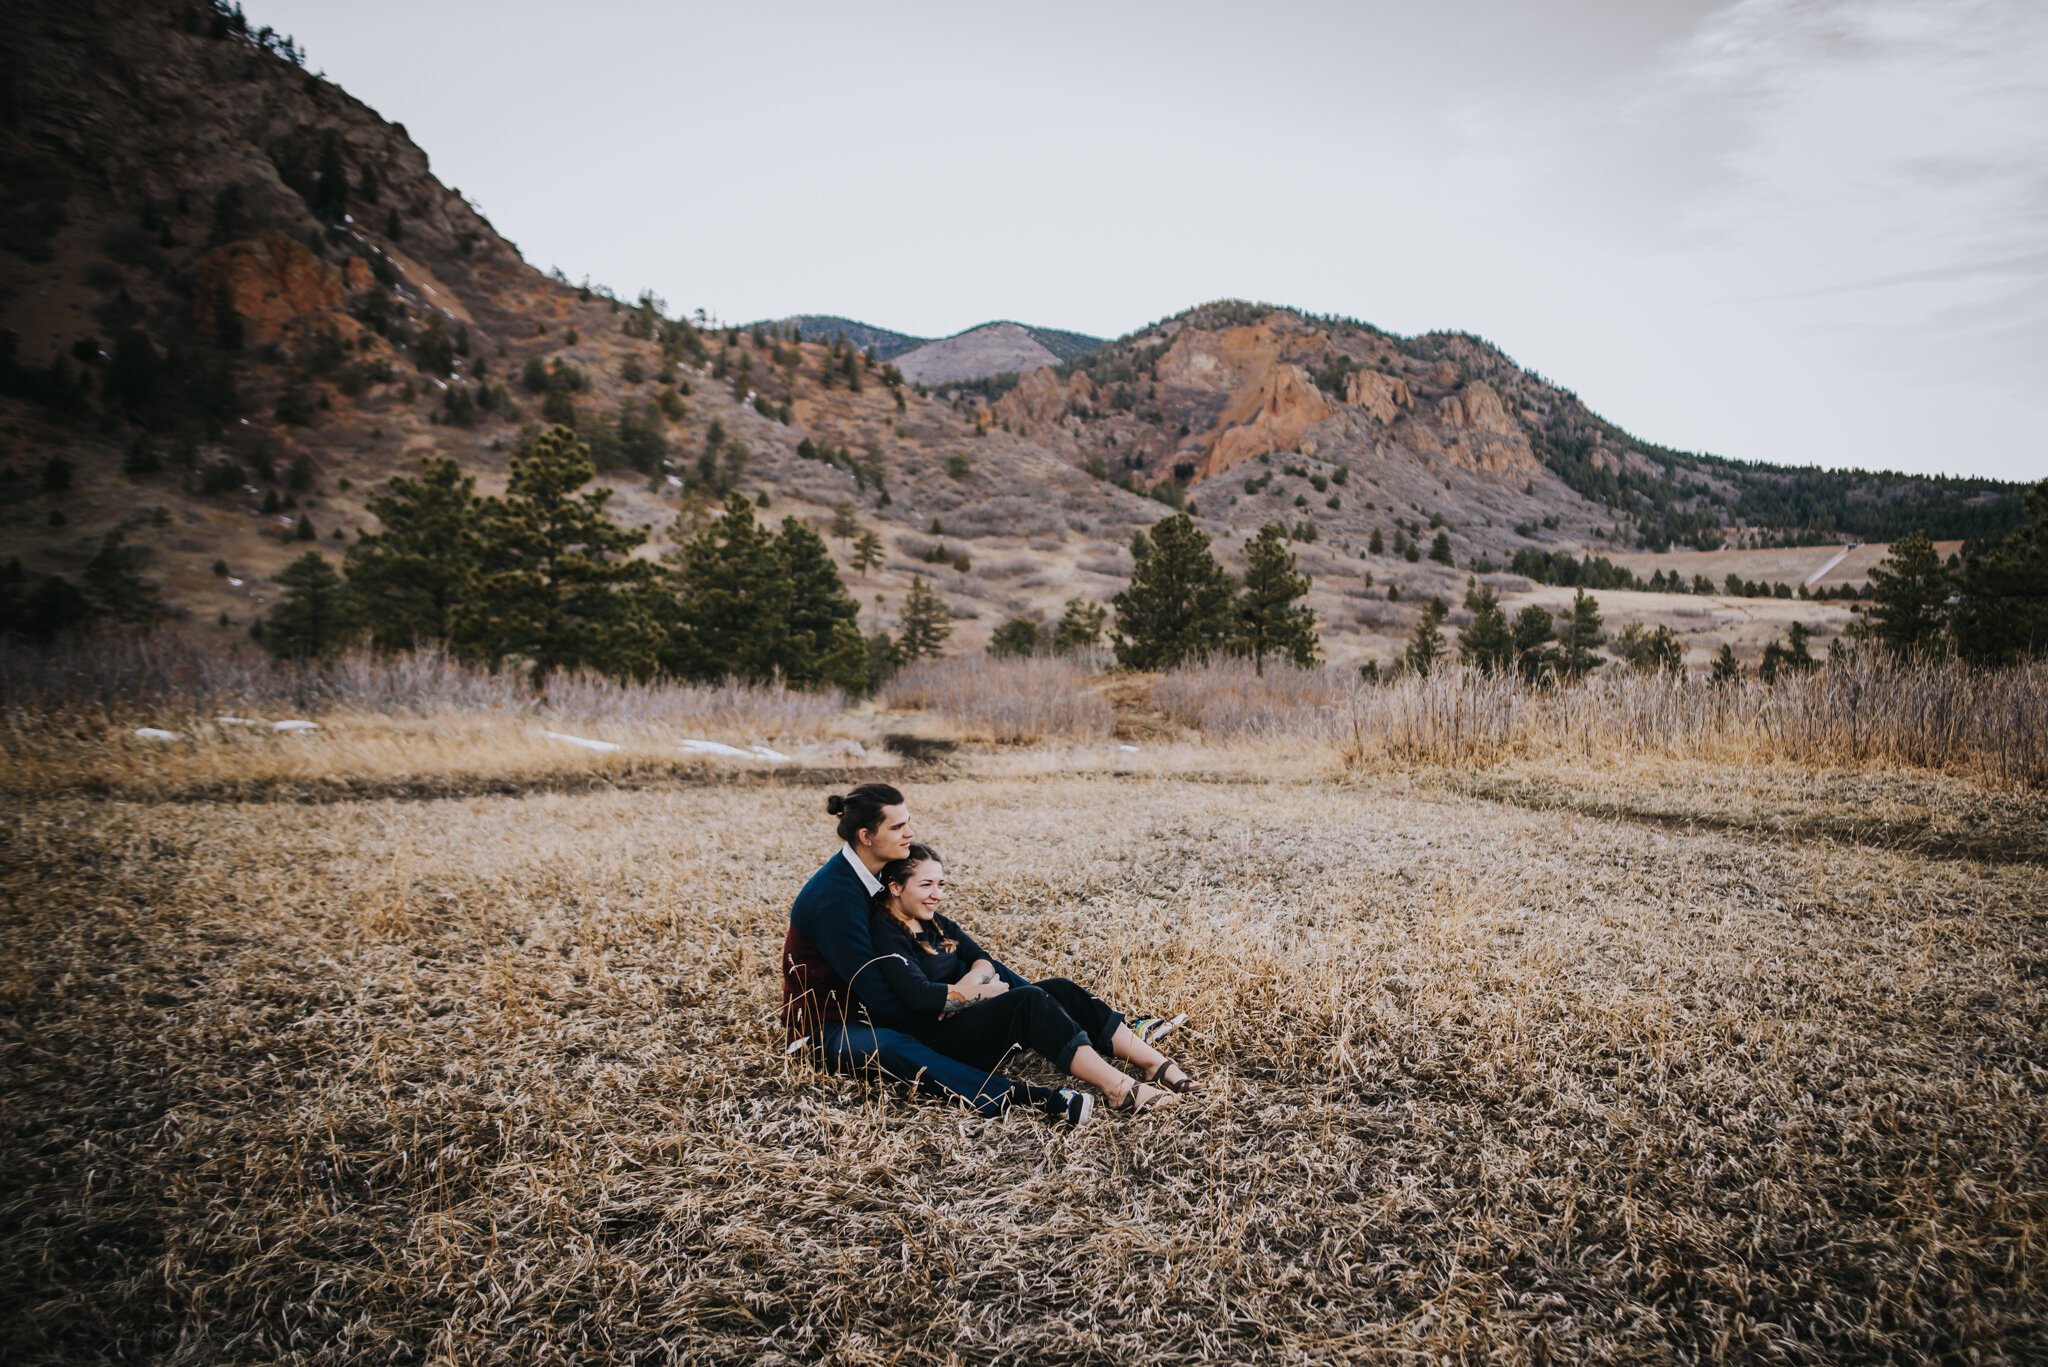 Yulia+and+Logan+Couples+Session+Colorado+Springs+Colorado+Sunset+Cheyenne+Canyon+Husband+Wife+Wild+Prairie+Photography-20-2020.jpeg